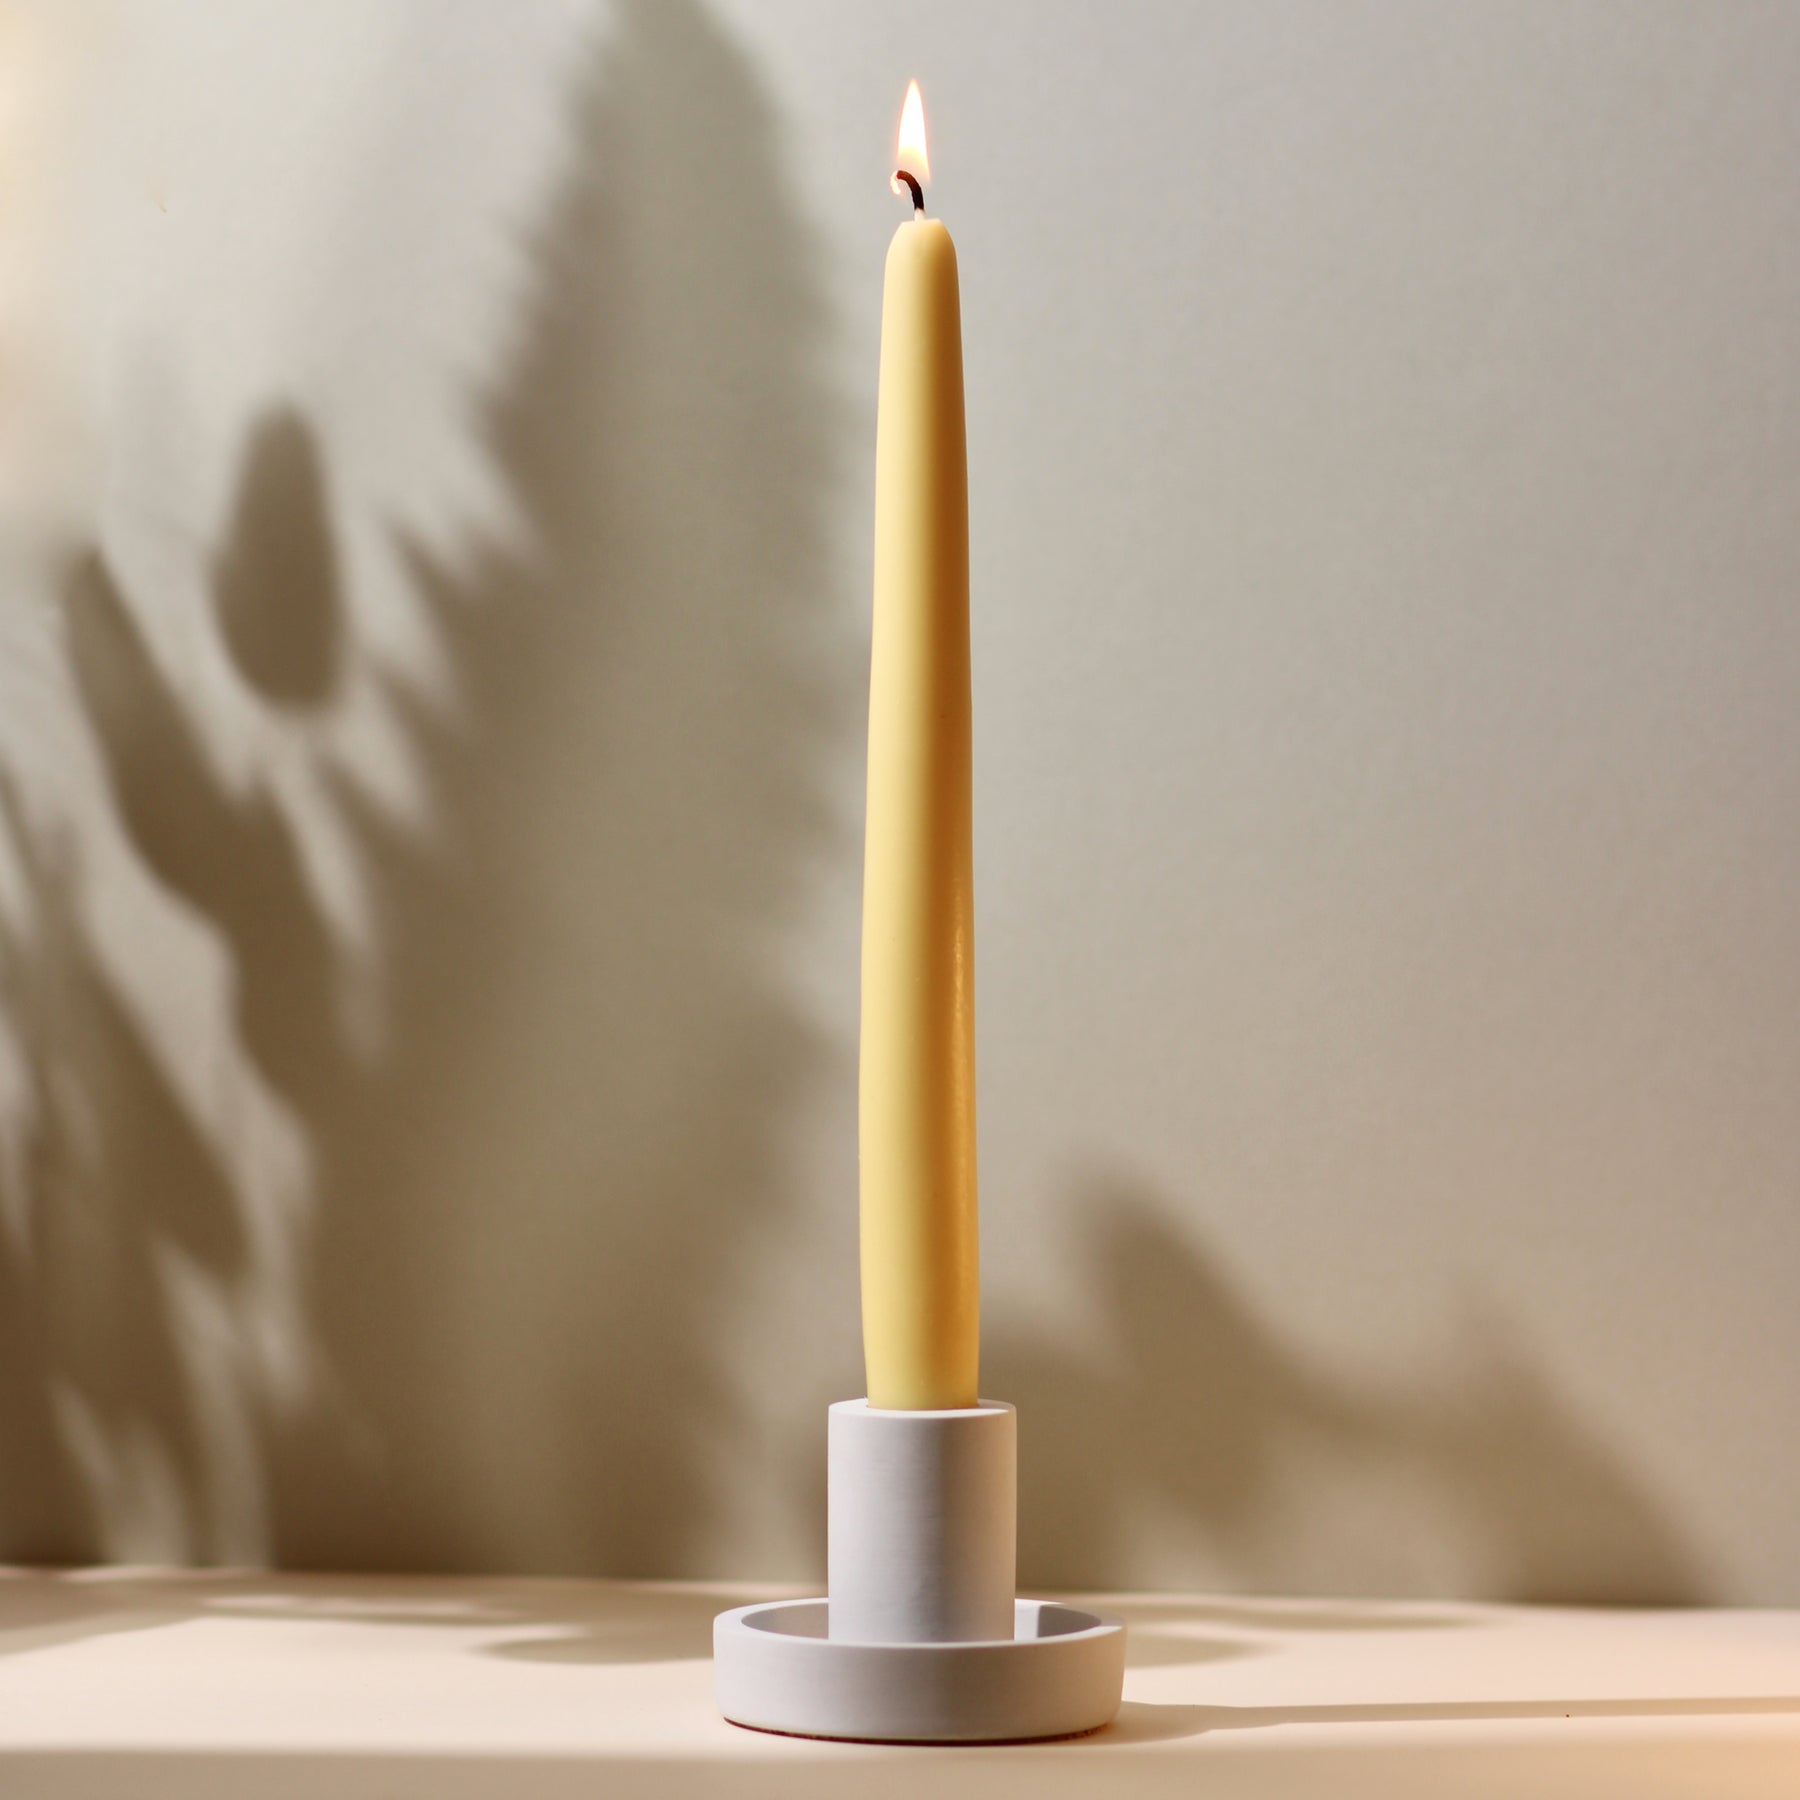 Beeswax/Soy Blend Taper Candles - Charcoal